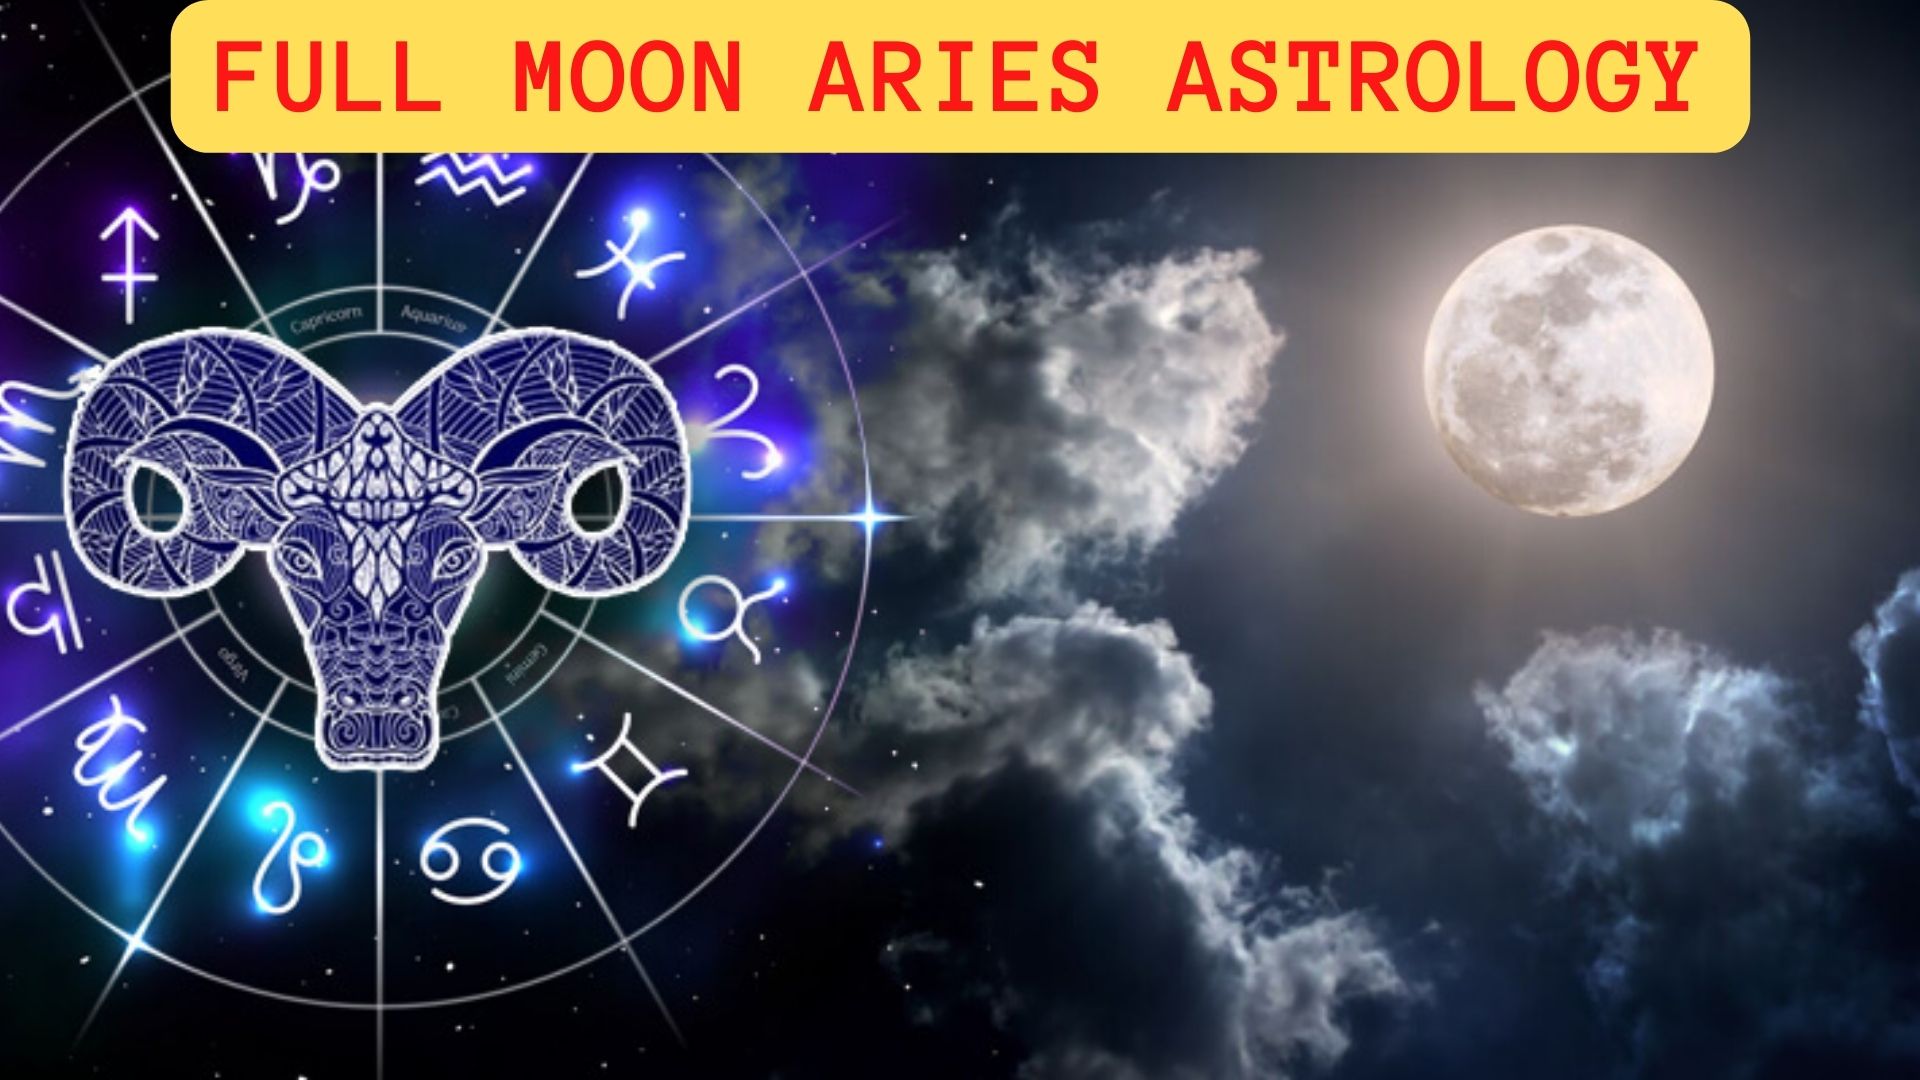 Full Moon Aries Astrology - Impulsive, Reckless, And Ready